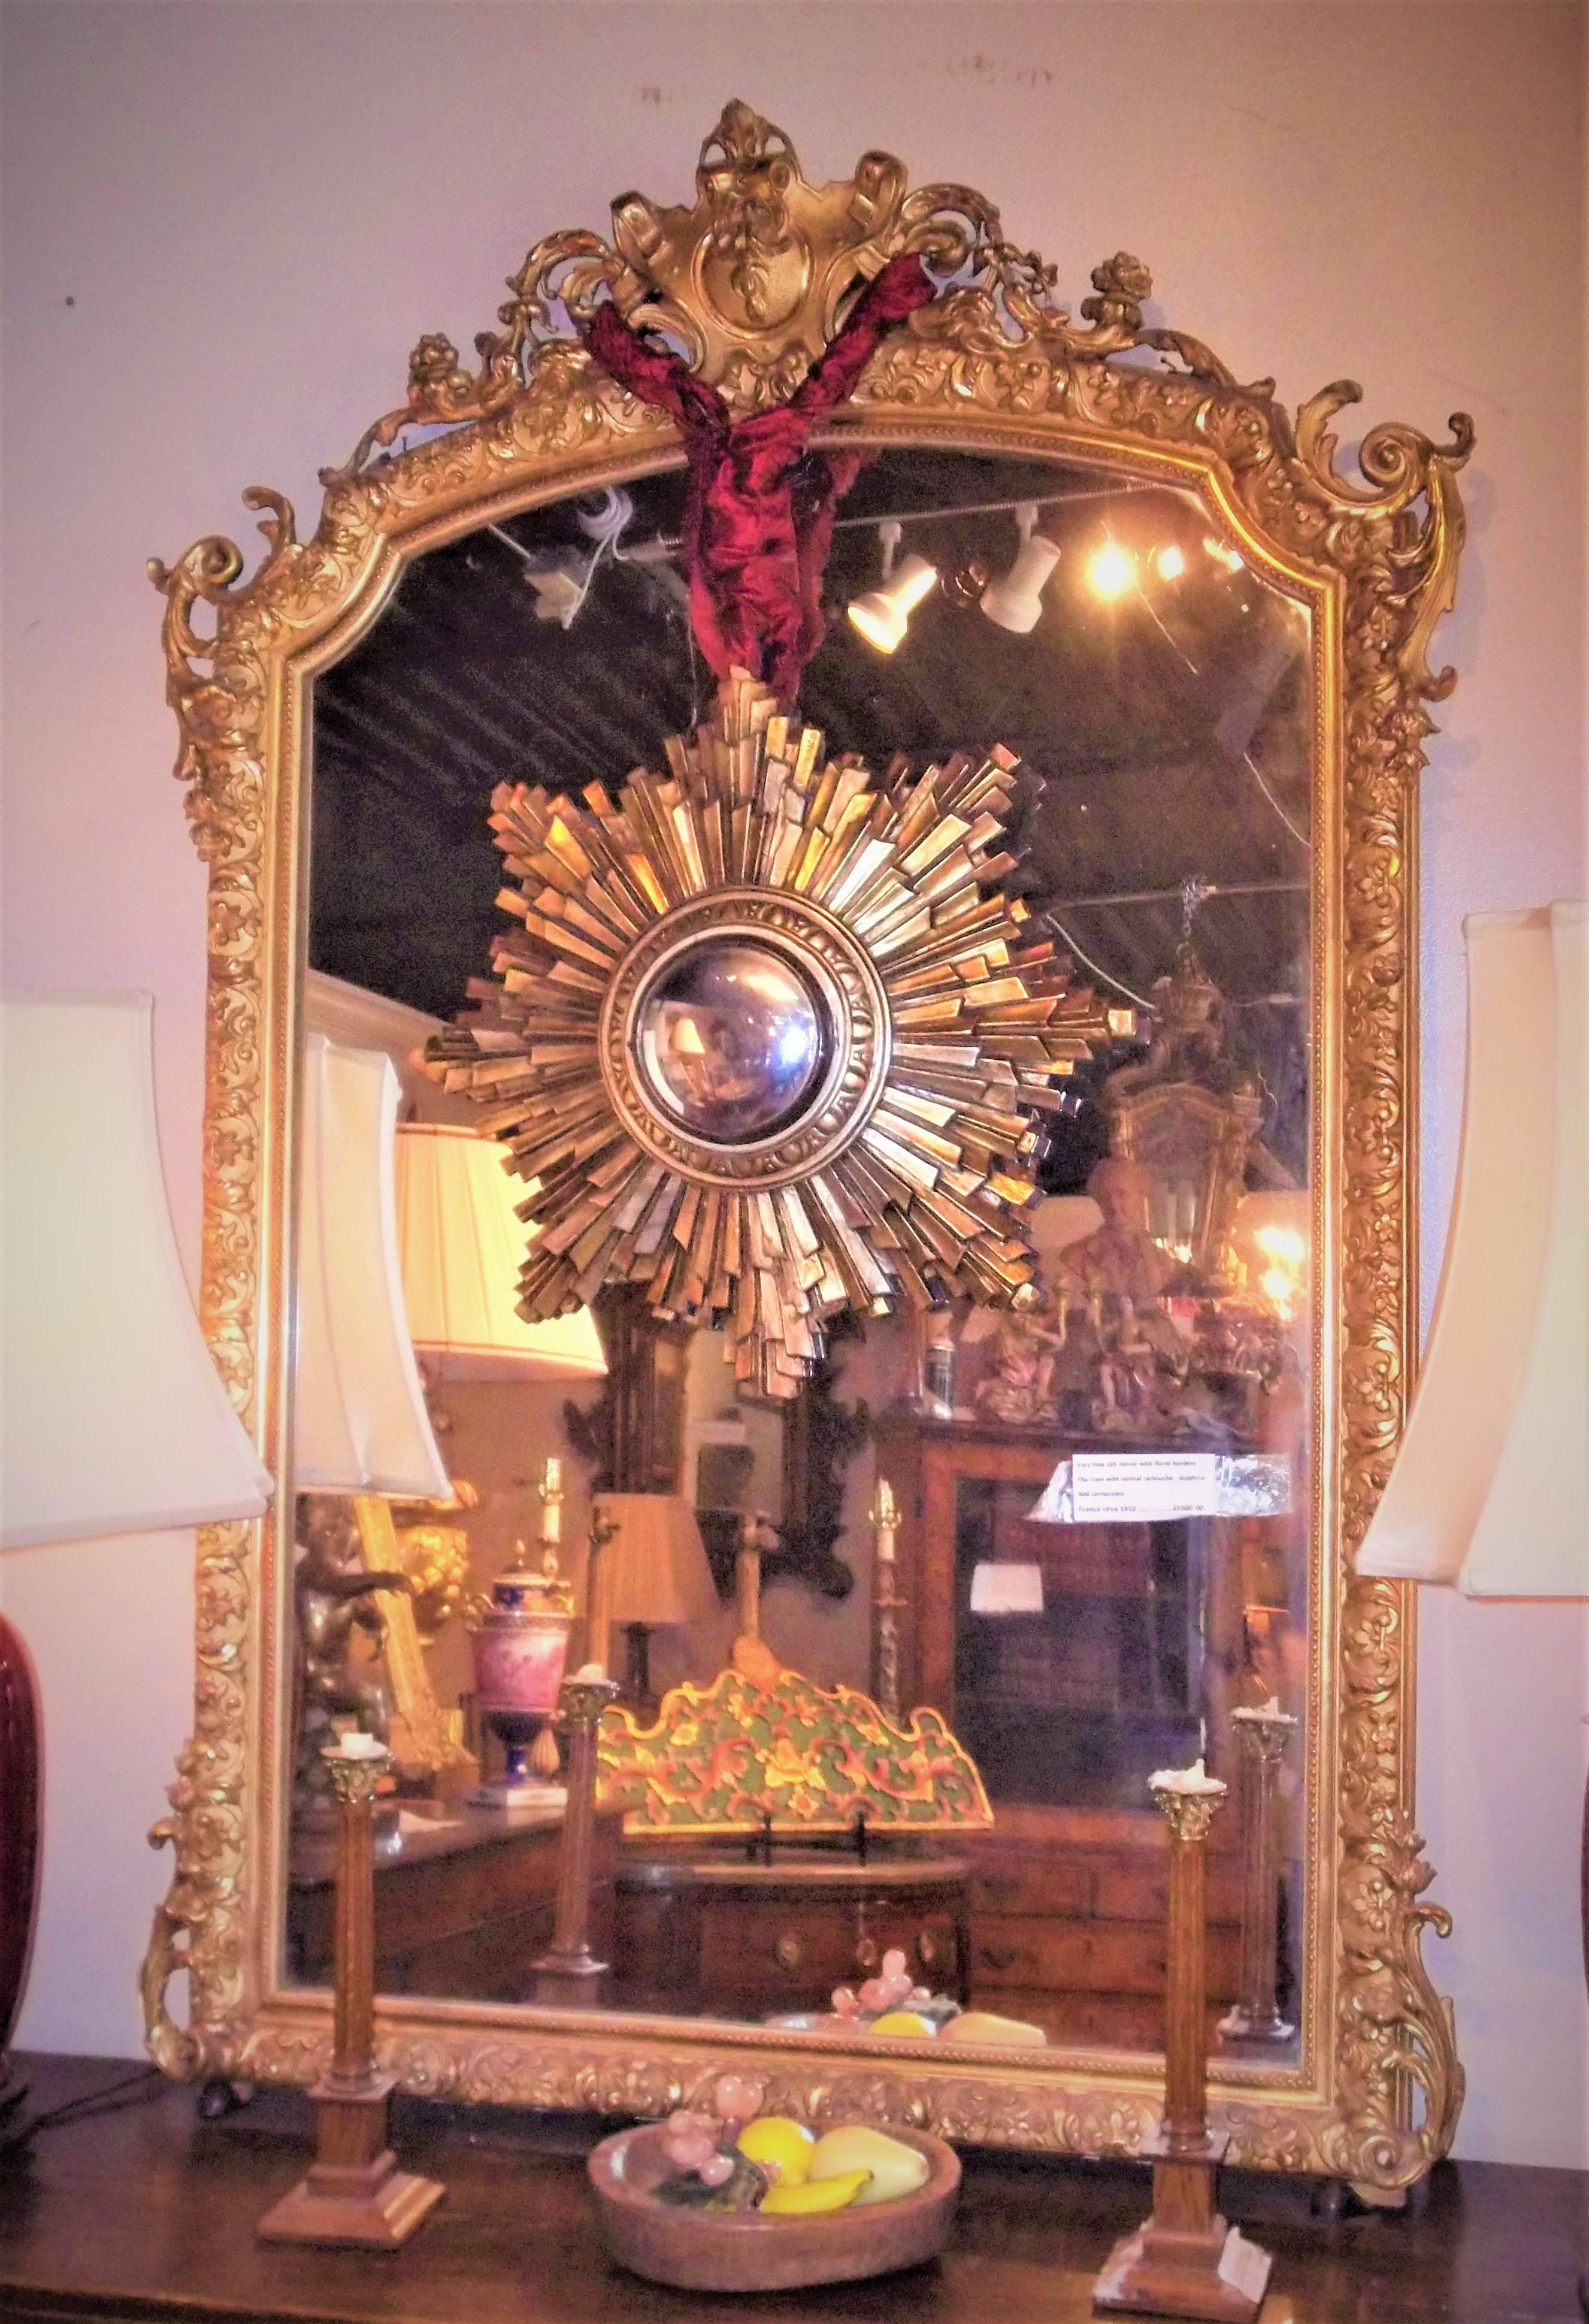 The mirror plate enclosed by gilded frame with floral and foliate scrolls. The crest with scrolling dolphins and cornucopia around a central cartouche. Each upper corner with niched curves.
Dust in crevices. Some red bole bleeding throughout...,